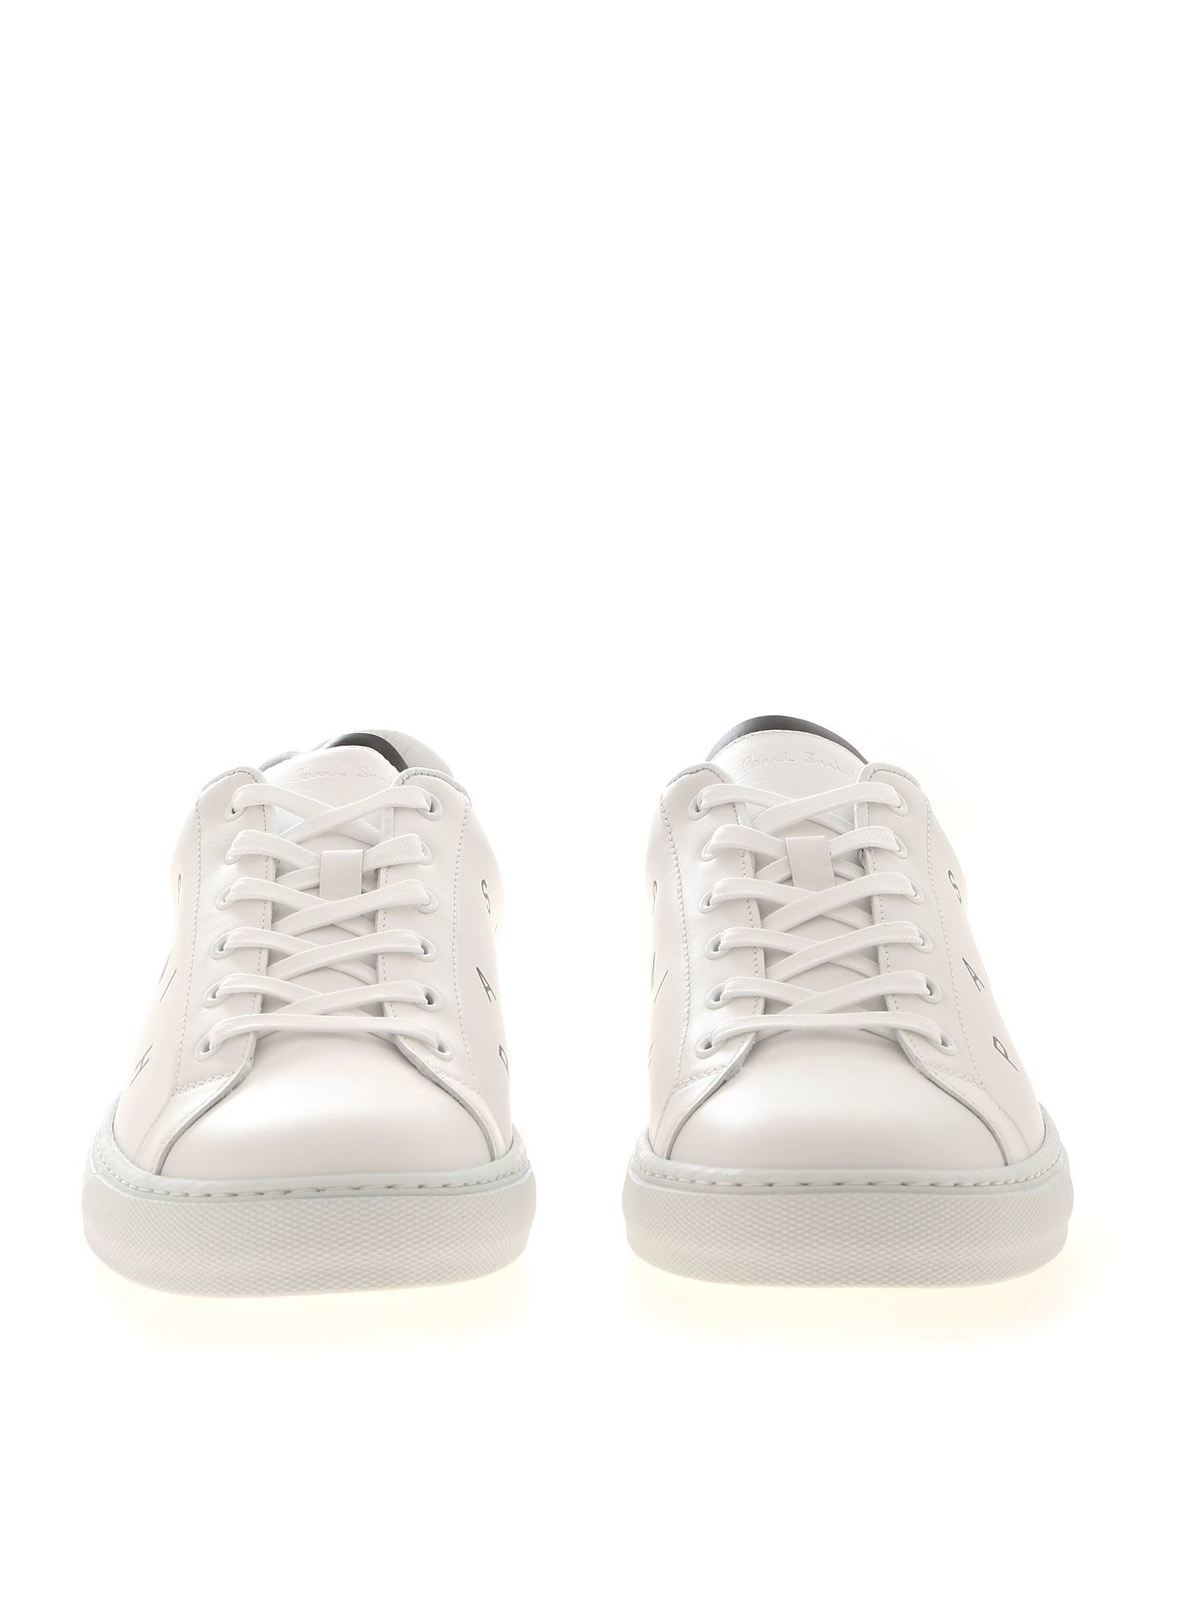 Trainers Paul Smith - Hansen sneakers in white - M1SHAN15AMOLV01